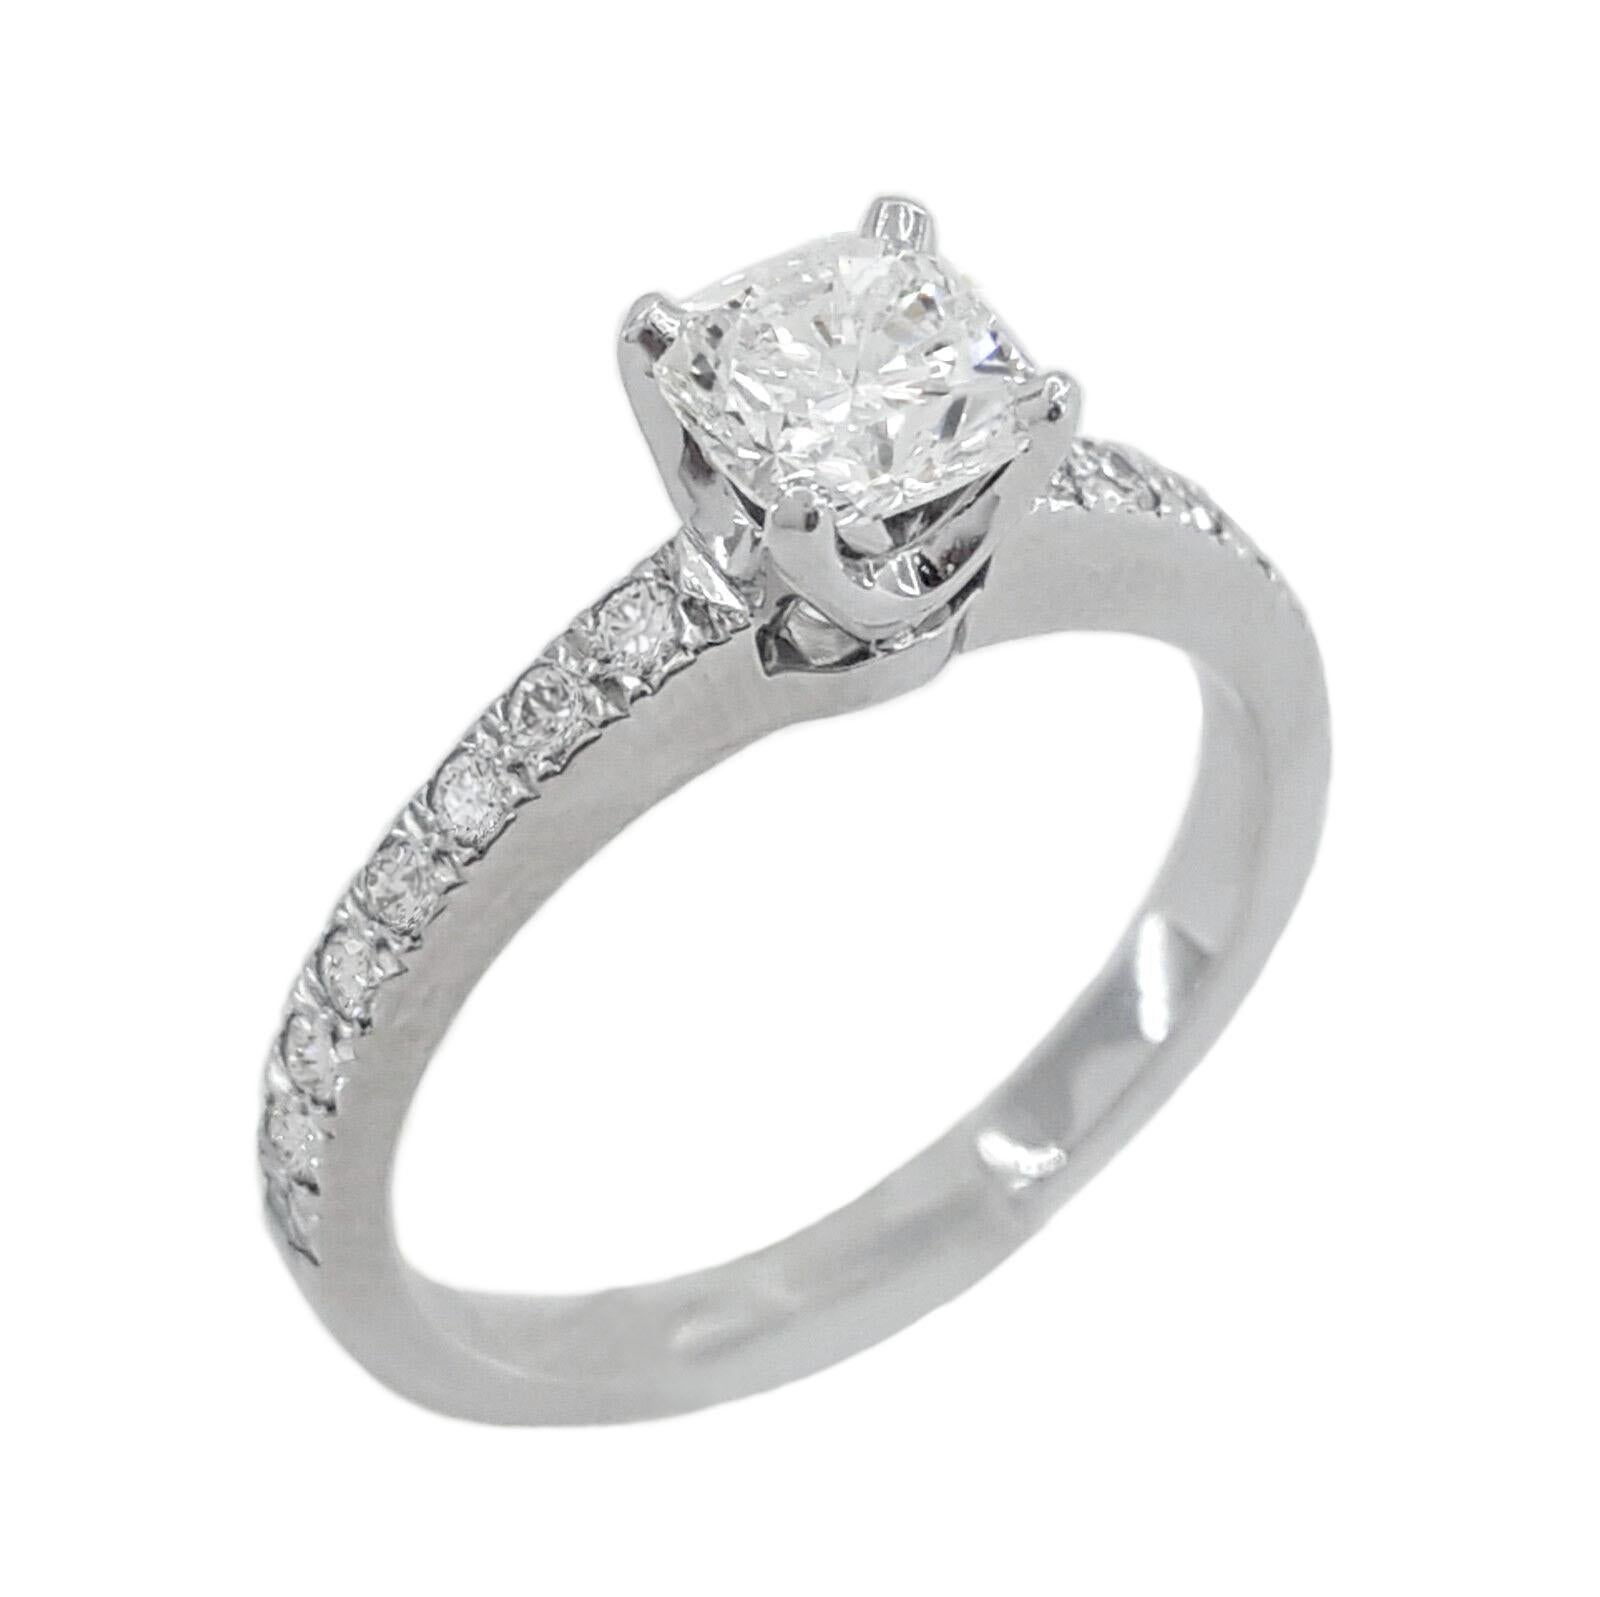 Contemporary GIA Certified Internally Flawless Clarity D Color Cushion Cut Pave Ring For Sale